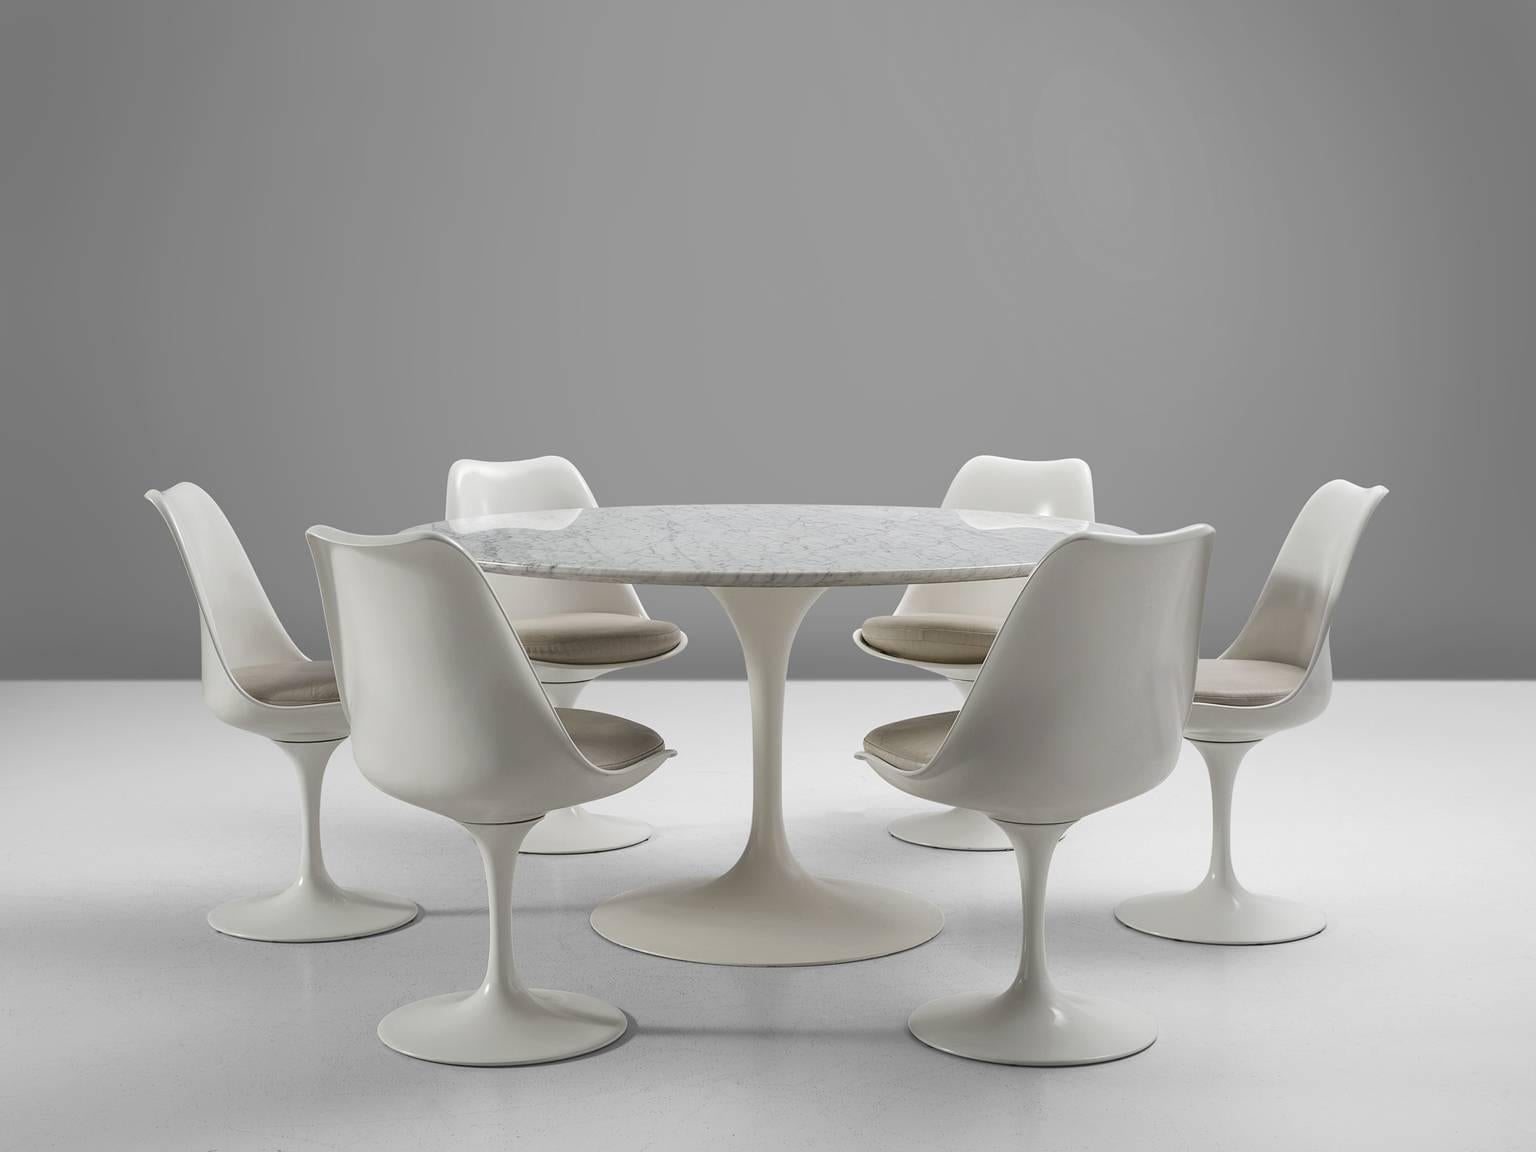 Set of six swivel dining chairs and table, in white metal, leather and marble, by Eero Saarinen for Knoll International, United States, 1958.

These six chairs with leathers seats and table with marble top are from the Tulip collection and were